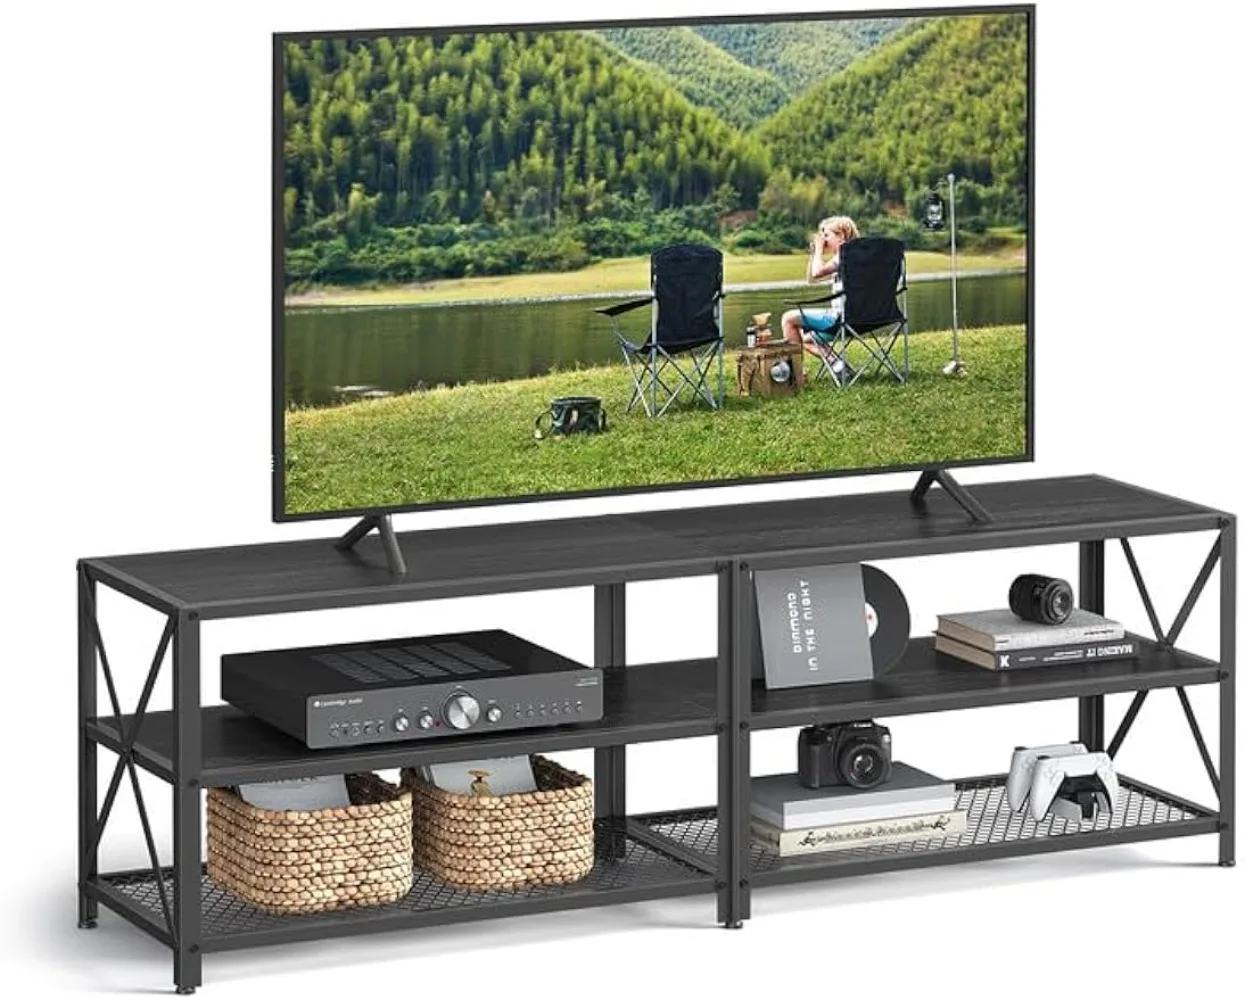 

VASAGLE TV Stand, TV Console for TVs Up to 70 Inches, TV Table, 63 Inches Width, TV Cabinet with Storage Shelves, Steel Frame